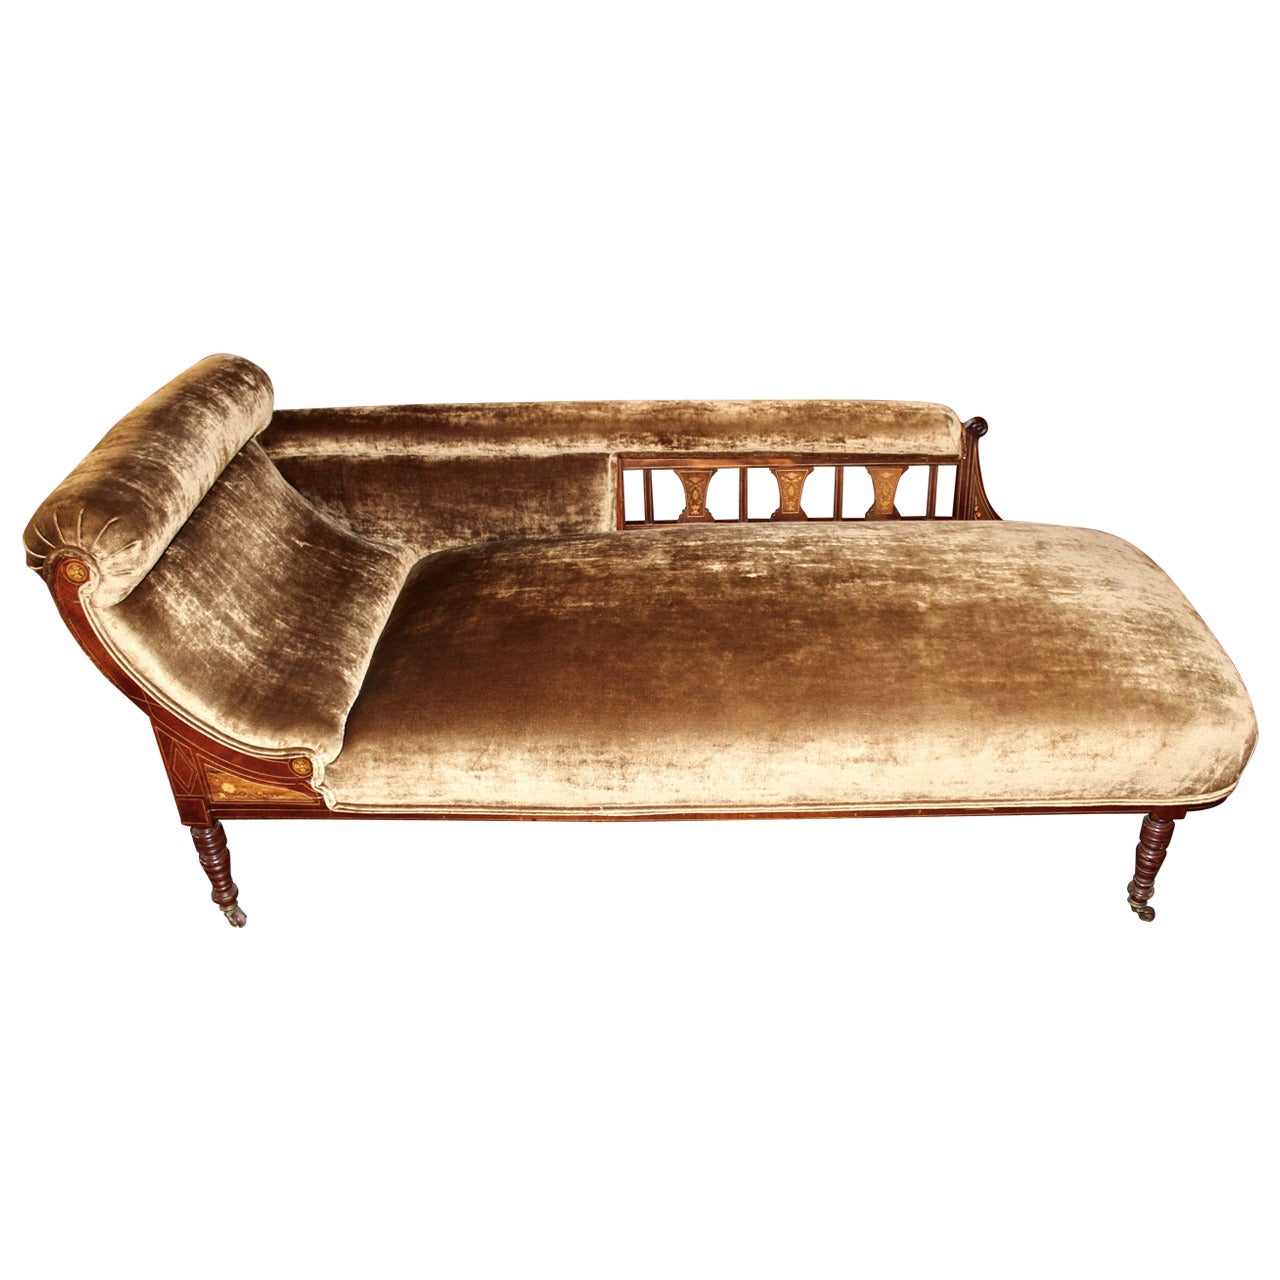 Early 20th Century English Fainting Couch